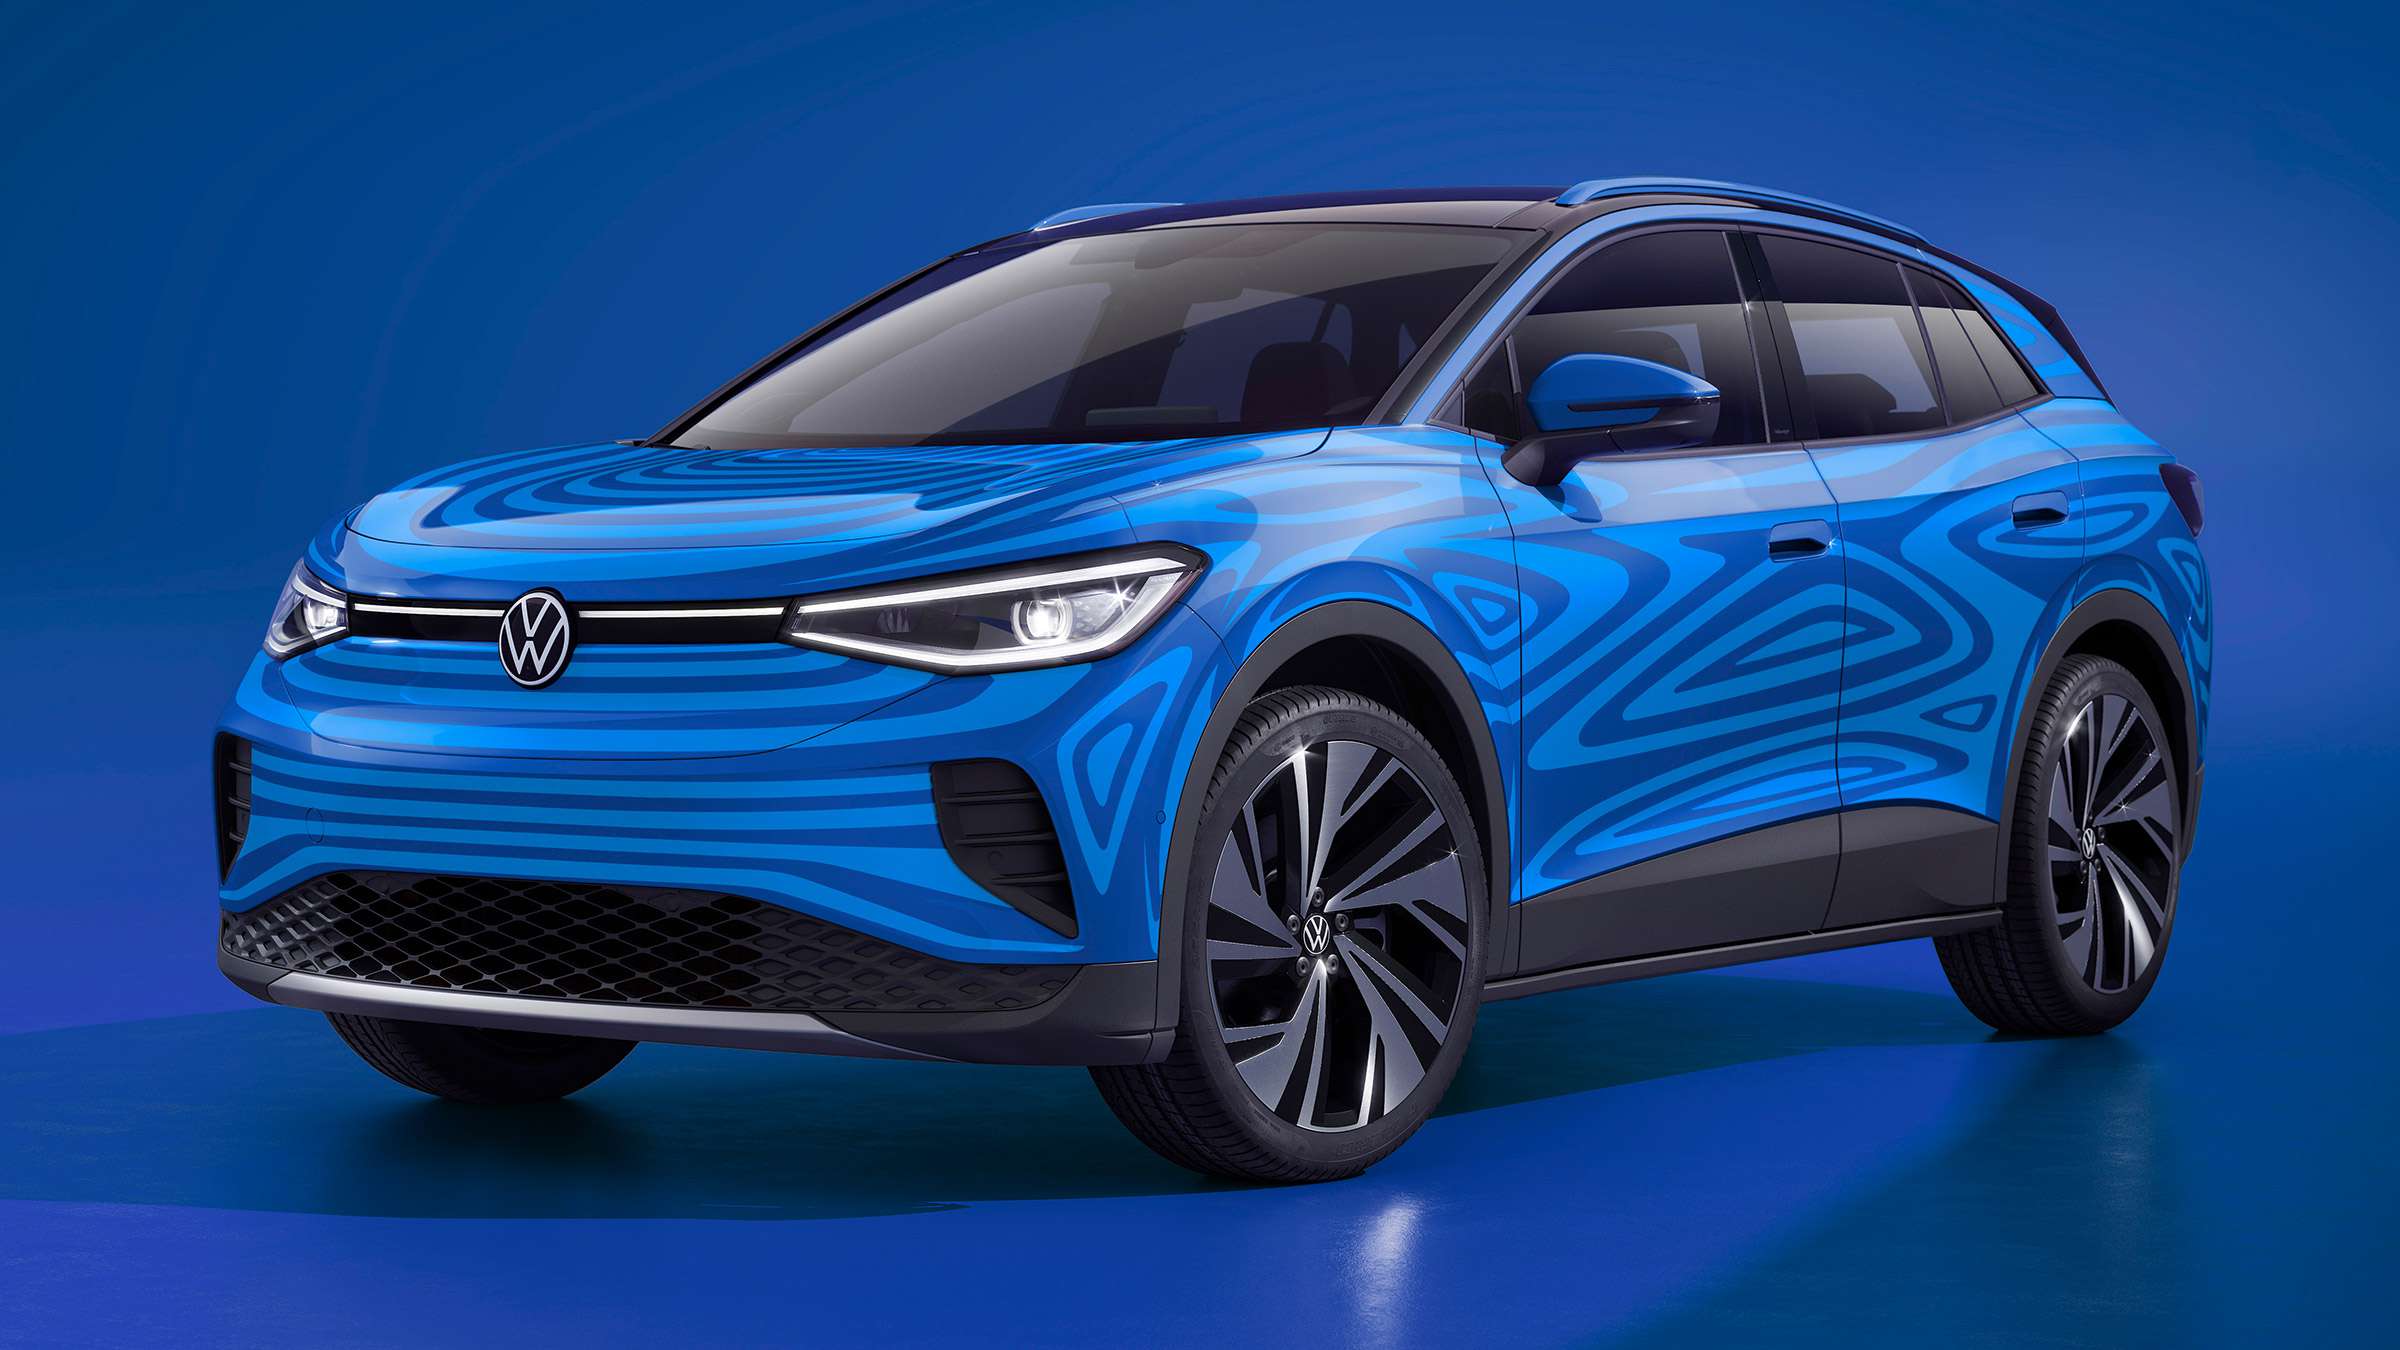 Taboola Ad Example 36437 - New 2020 Volkswagen ID.4 Electric SUV Unveiled Online | Auto Express